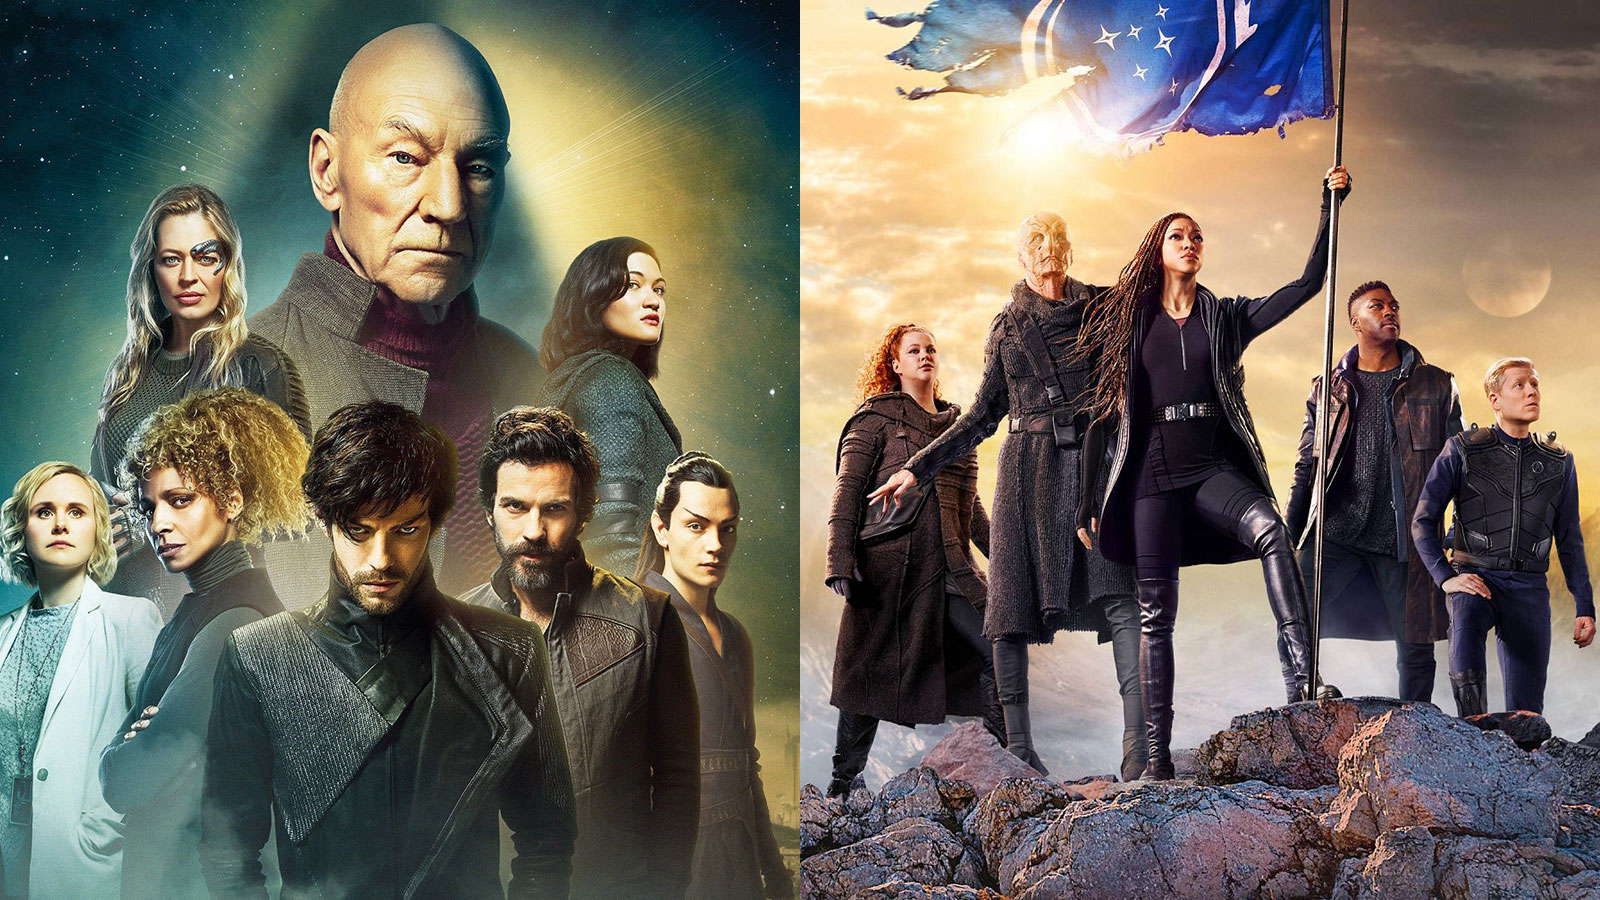 Star Trek: Discovery And Picard Win 3 Saturn Awards — Including Best Actor, Best Supporting Actor, Best Sci-Fi TV Series